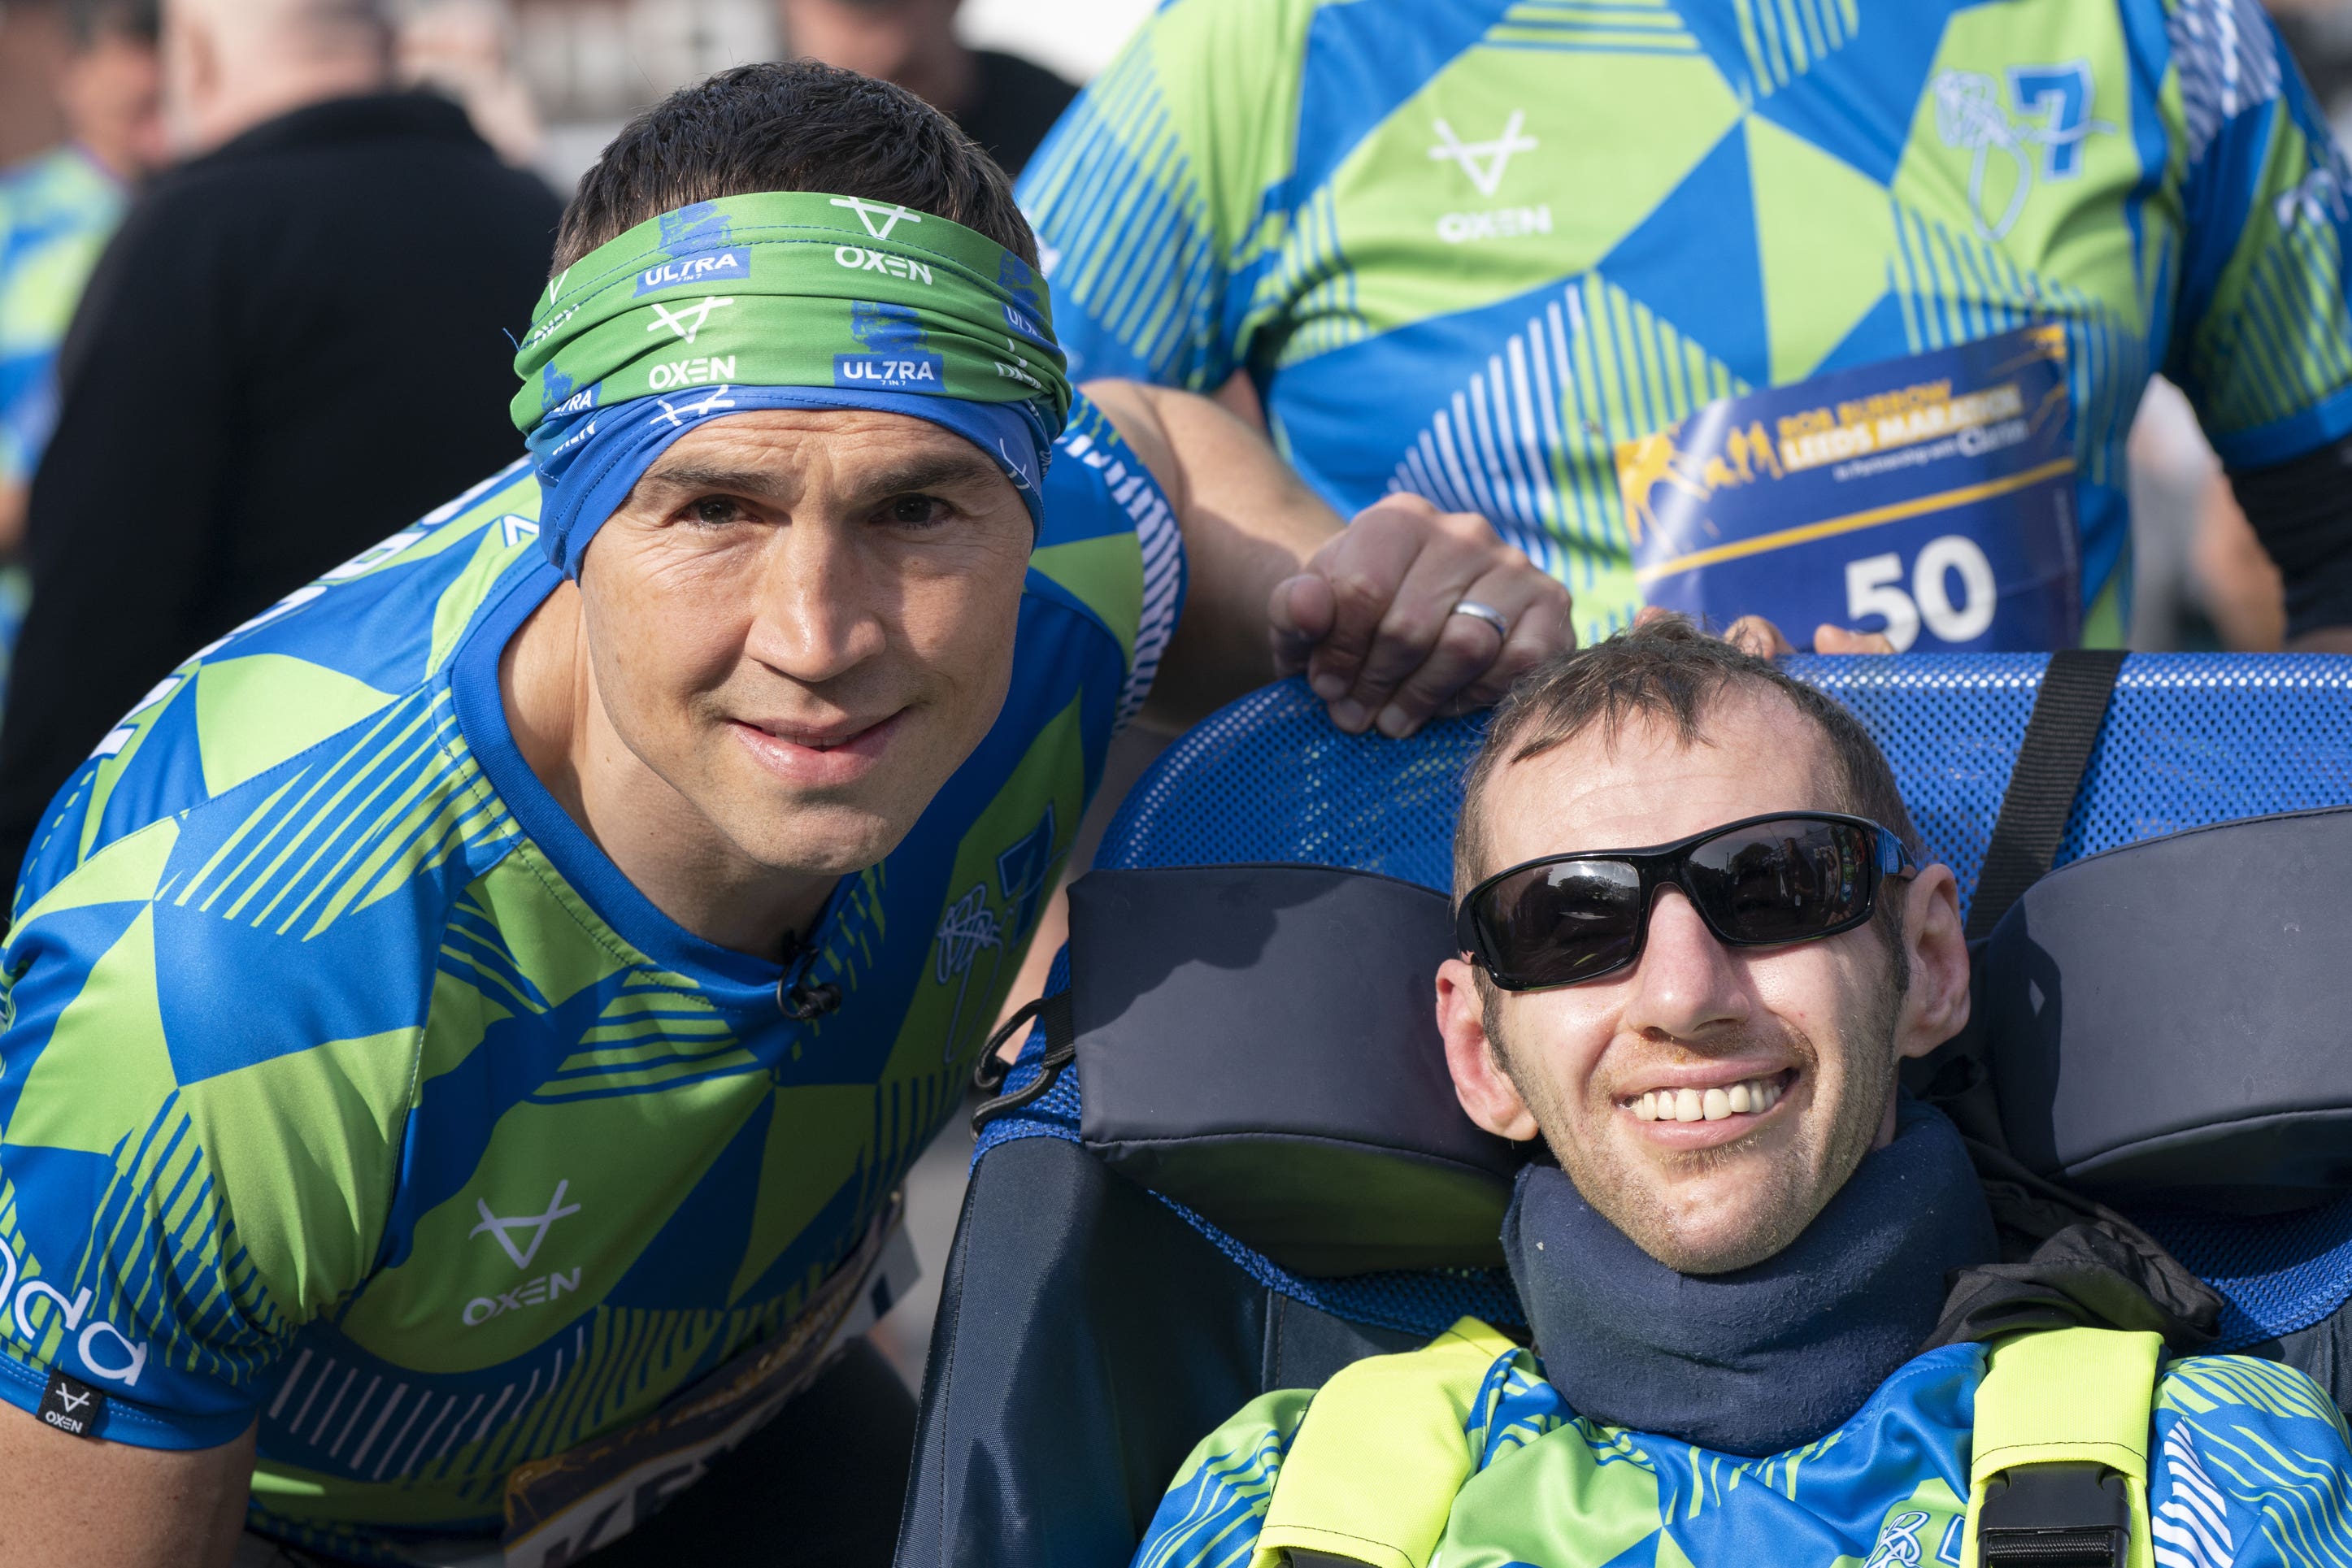 Kevin Sinfield and Rob Burrow raised millions for research into MND